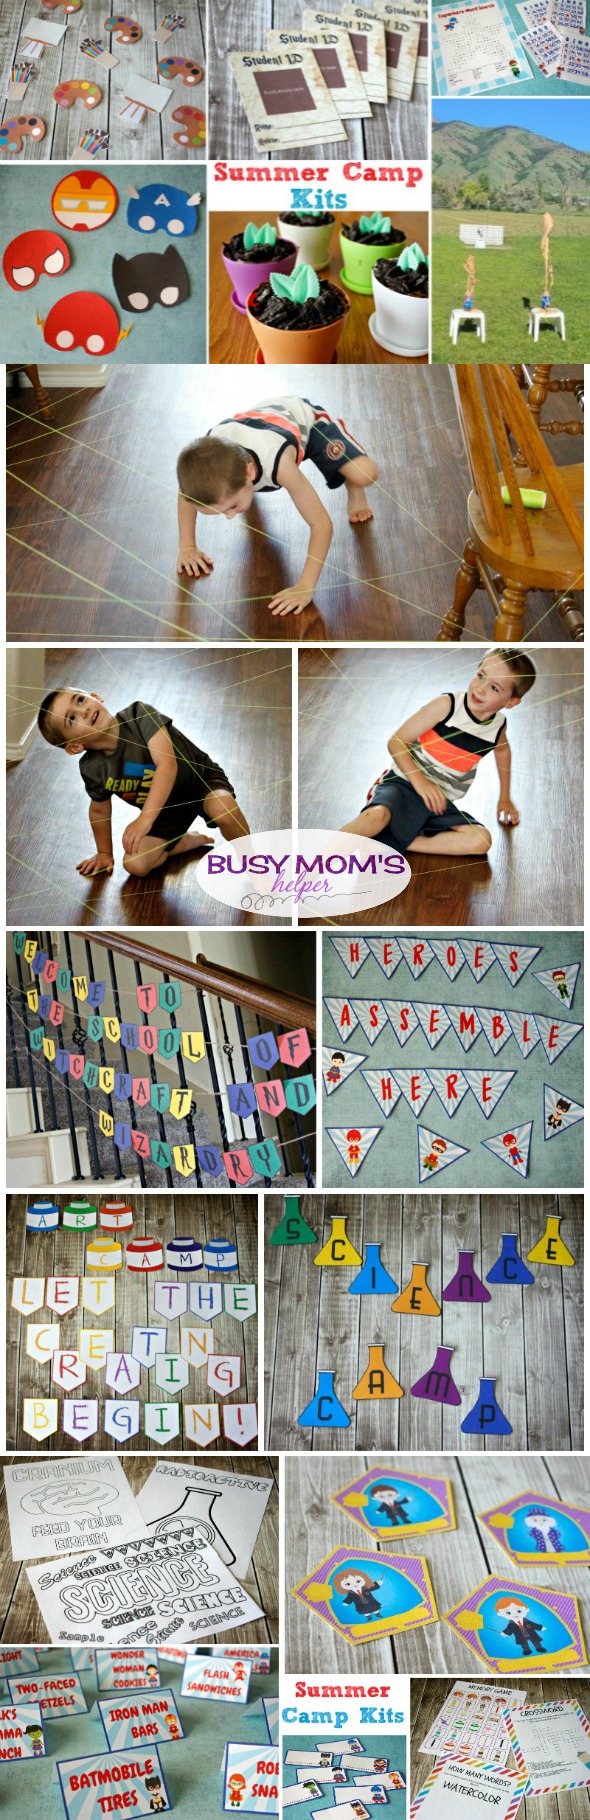 Announcing the Busy Mom Bundle - practically everything you need to help get your life in order! Whether you need help organizing your families important files, want meal plans done for you for a YEAR, love Disney activities, need a reliable planner, or help planning the best summer camp ever - this Busy Mom Bundle has practically EVERYTHING to help out! #busymombundle #printables #parenting #homebinder #familyhomebinder #family #budget #disney #summercamp #momhelp #mealplan